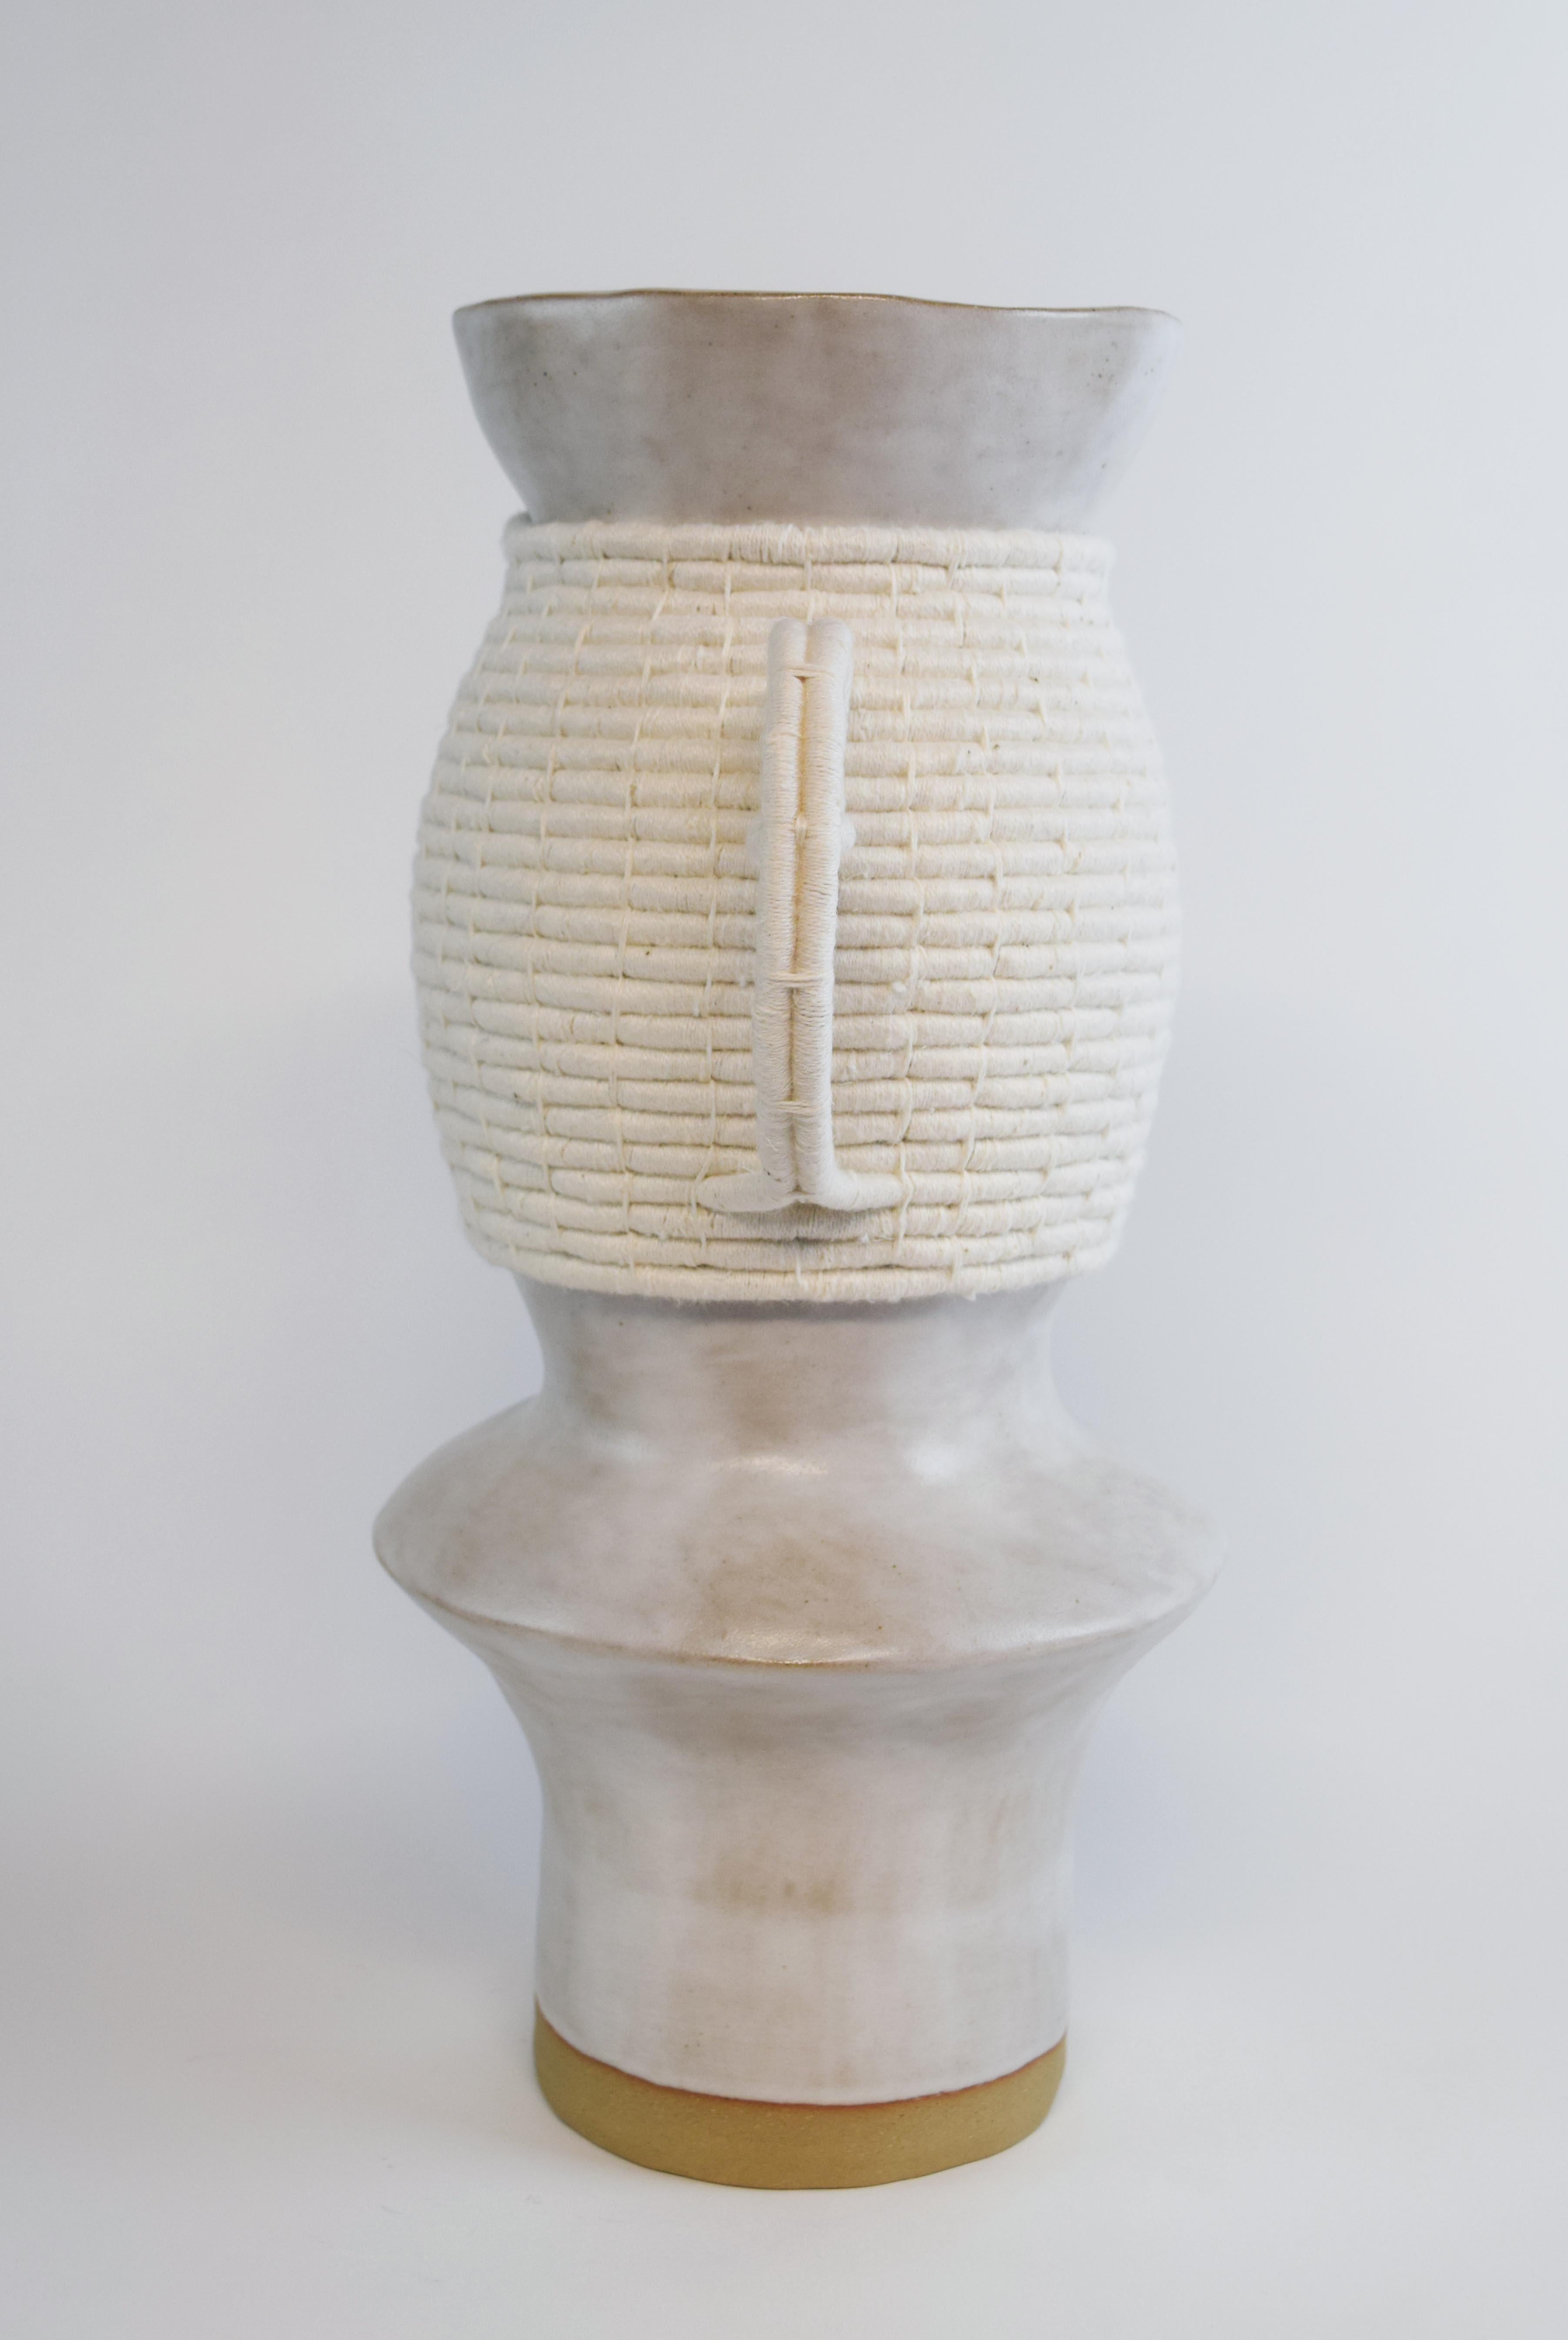 Hand-Crafted One of a Kind Ceramic and Woven Cotton Vase #749 - White with White Weaving